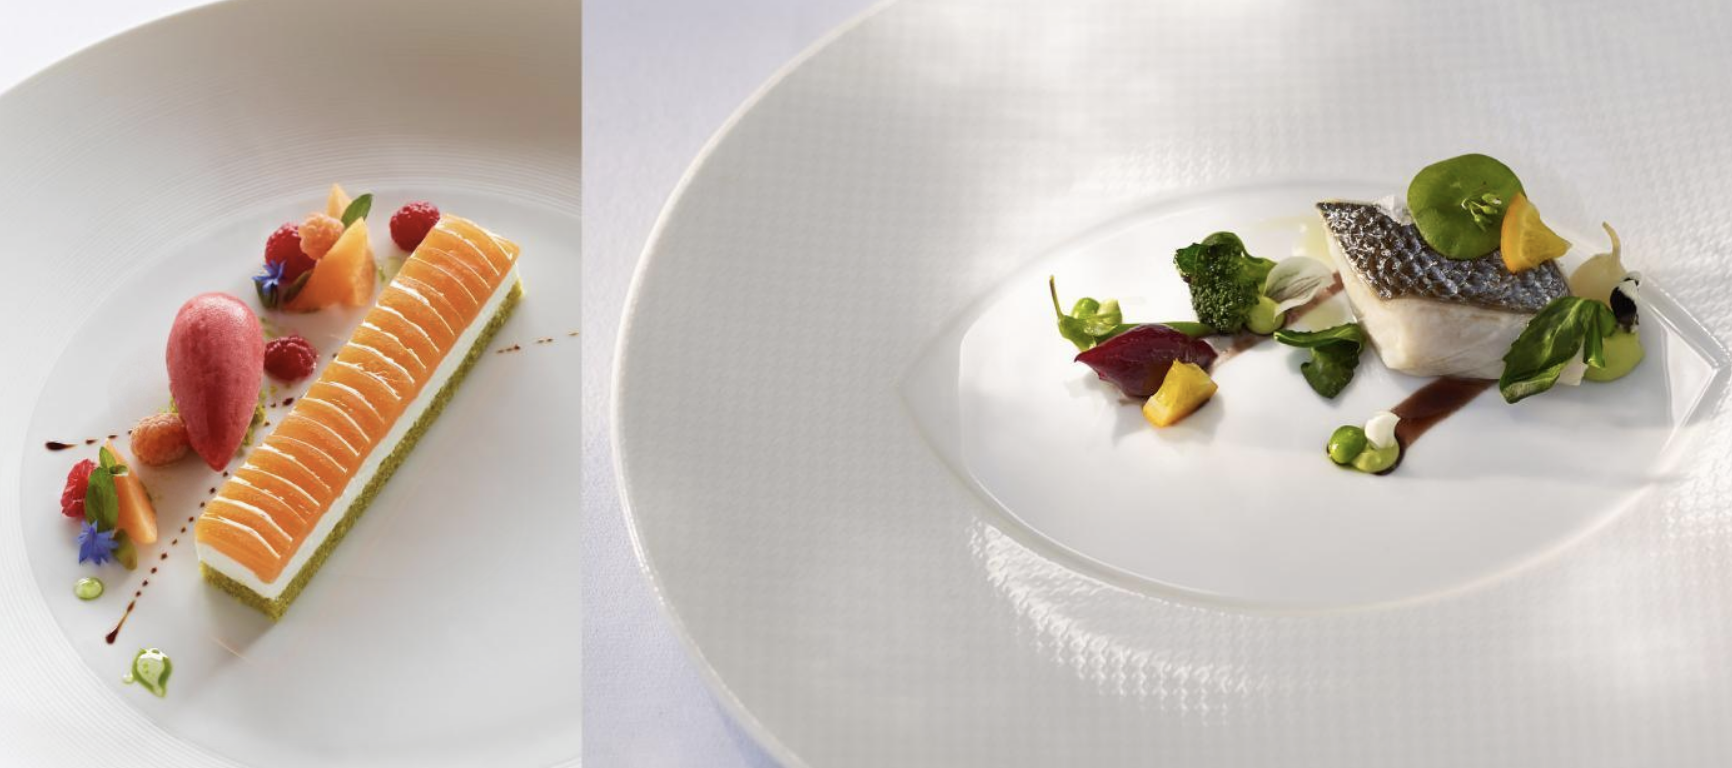 Smart-Alternative-Fuels-The-French-Laundry-Plated-Food-III.png